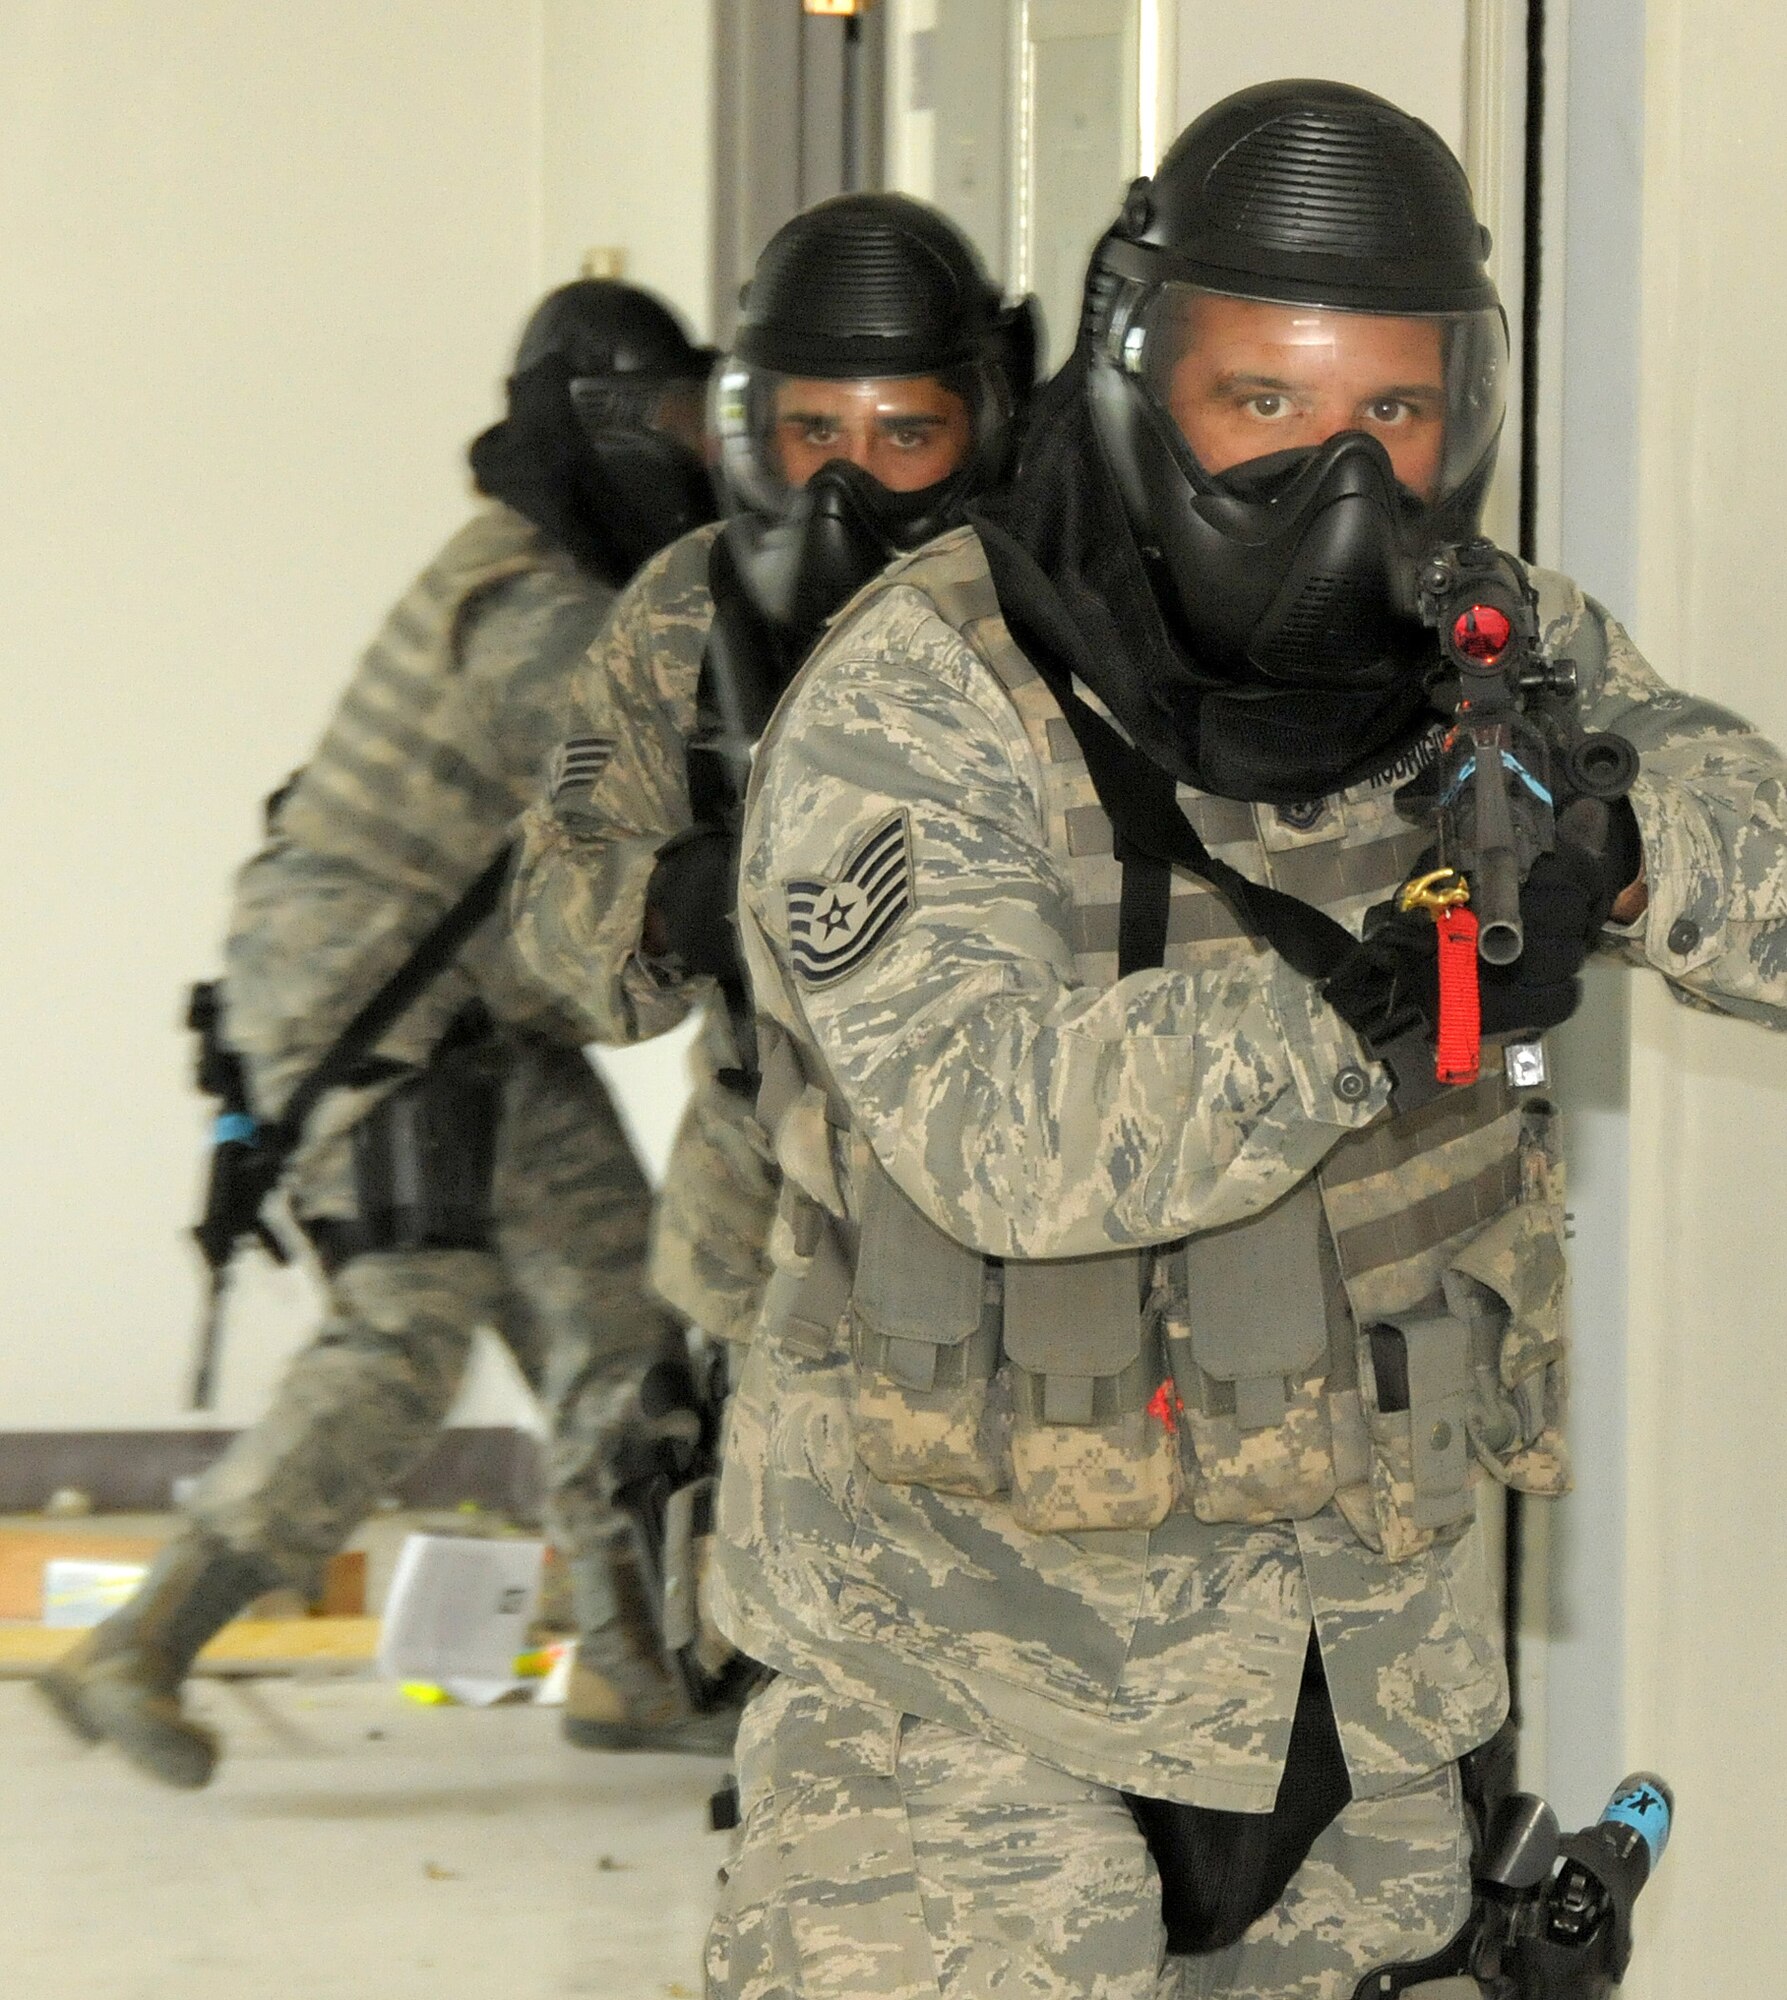 Members of the Security Forces Squadron from the 146th Airlift Wing, Channel Islands Air National Guard Station, Calif. participate in an active shooter training scenario conducted by the 176th Air Wing Security Forces Squadron, Alaska Air National Guard, Joint Base Elmendorf- Richardson, Anchorage, Alaska on June 13, 2011.  Photo by Tech. Sgt. Alex Koenig